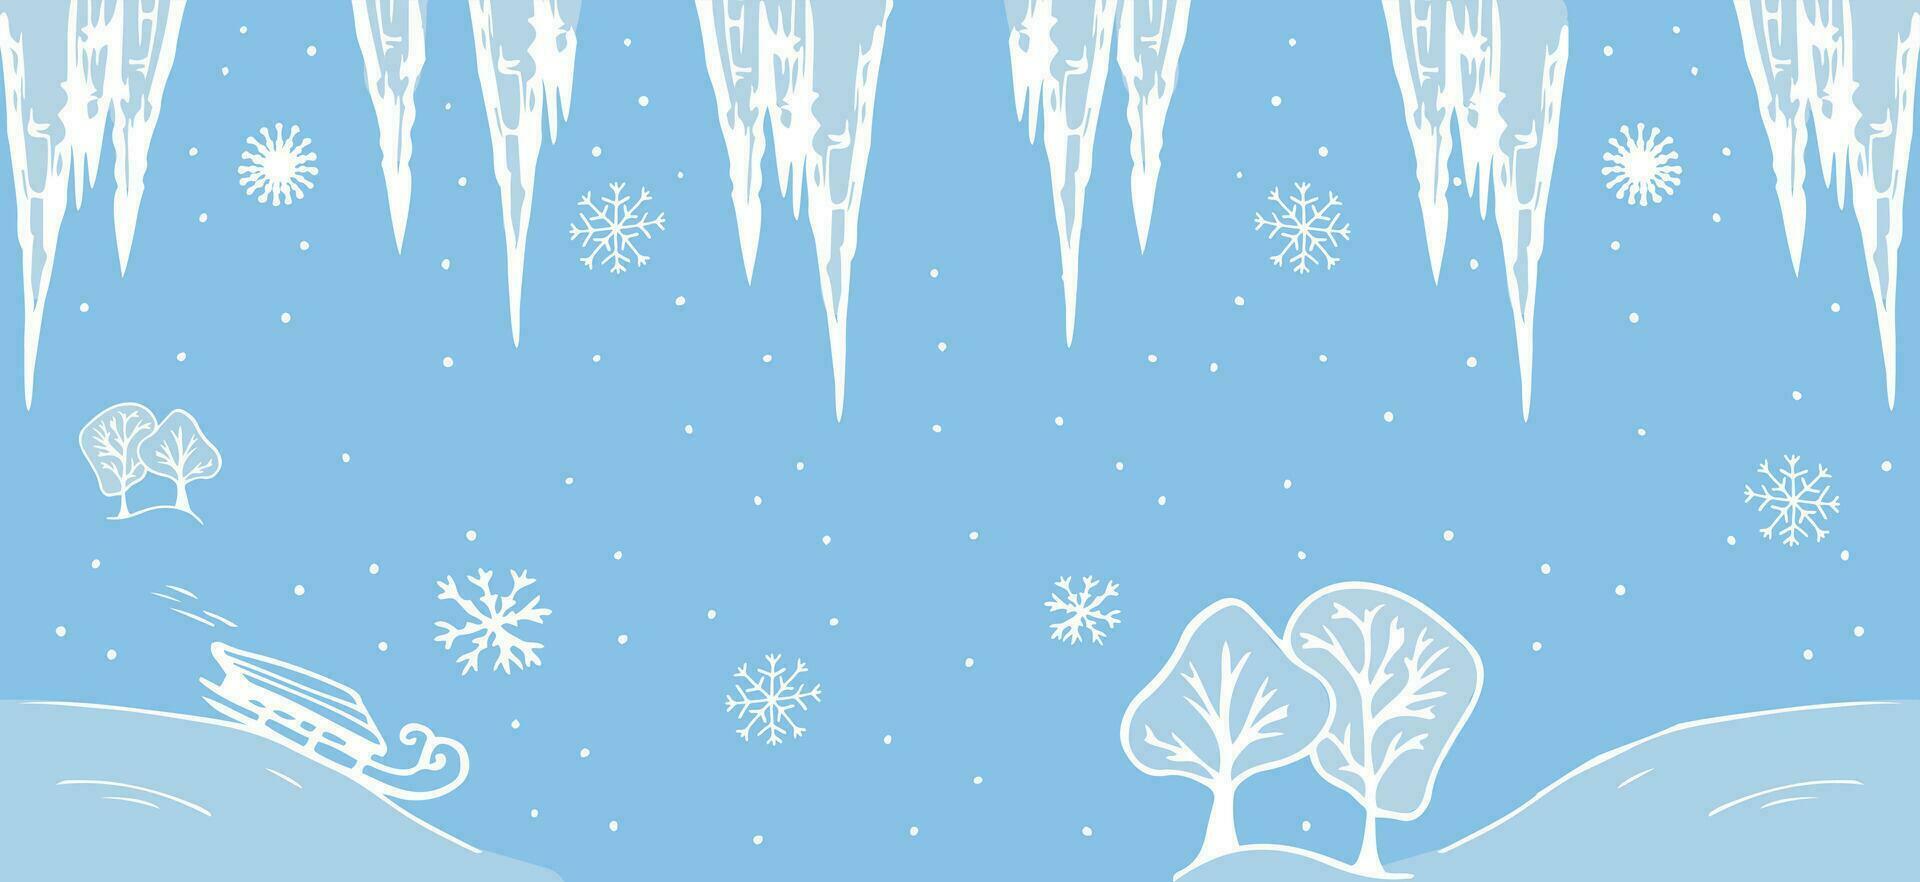 Winter Vector blue horizontal banner. Doodle illustration with sled, icicles, snowflakes, snowfall.